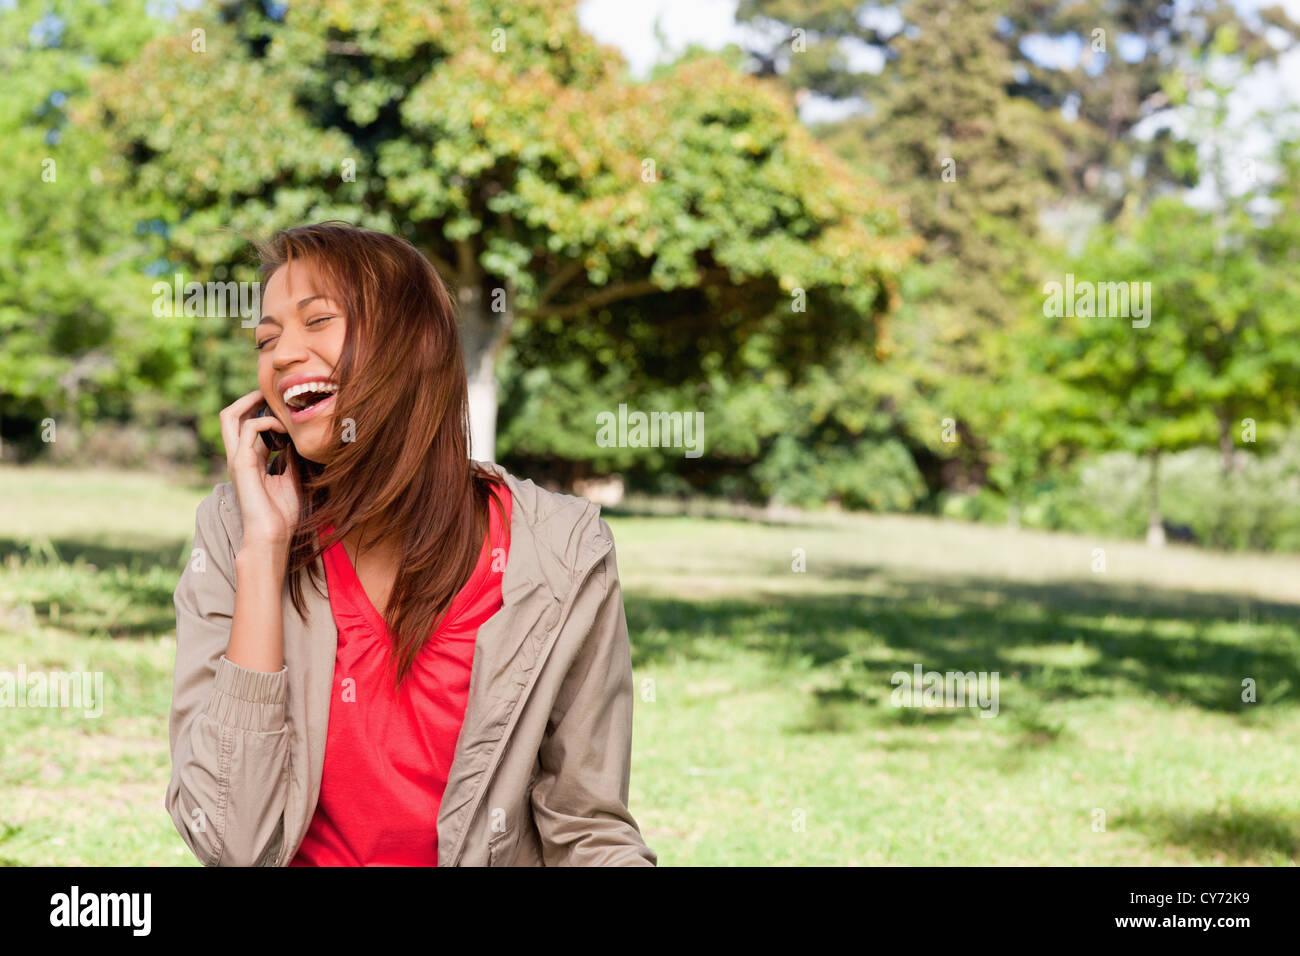 Young woman enthusiastically laughing while on the phone in an open grassland area Stock Photo